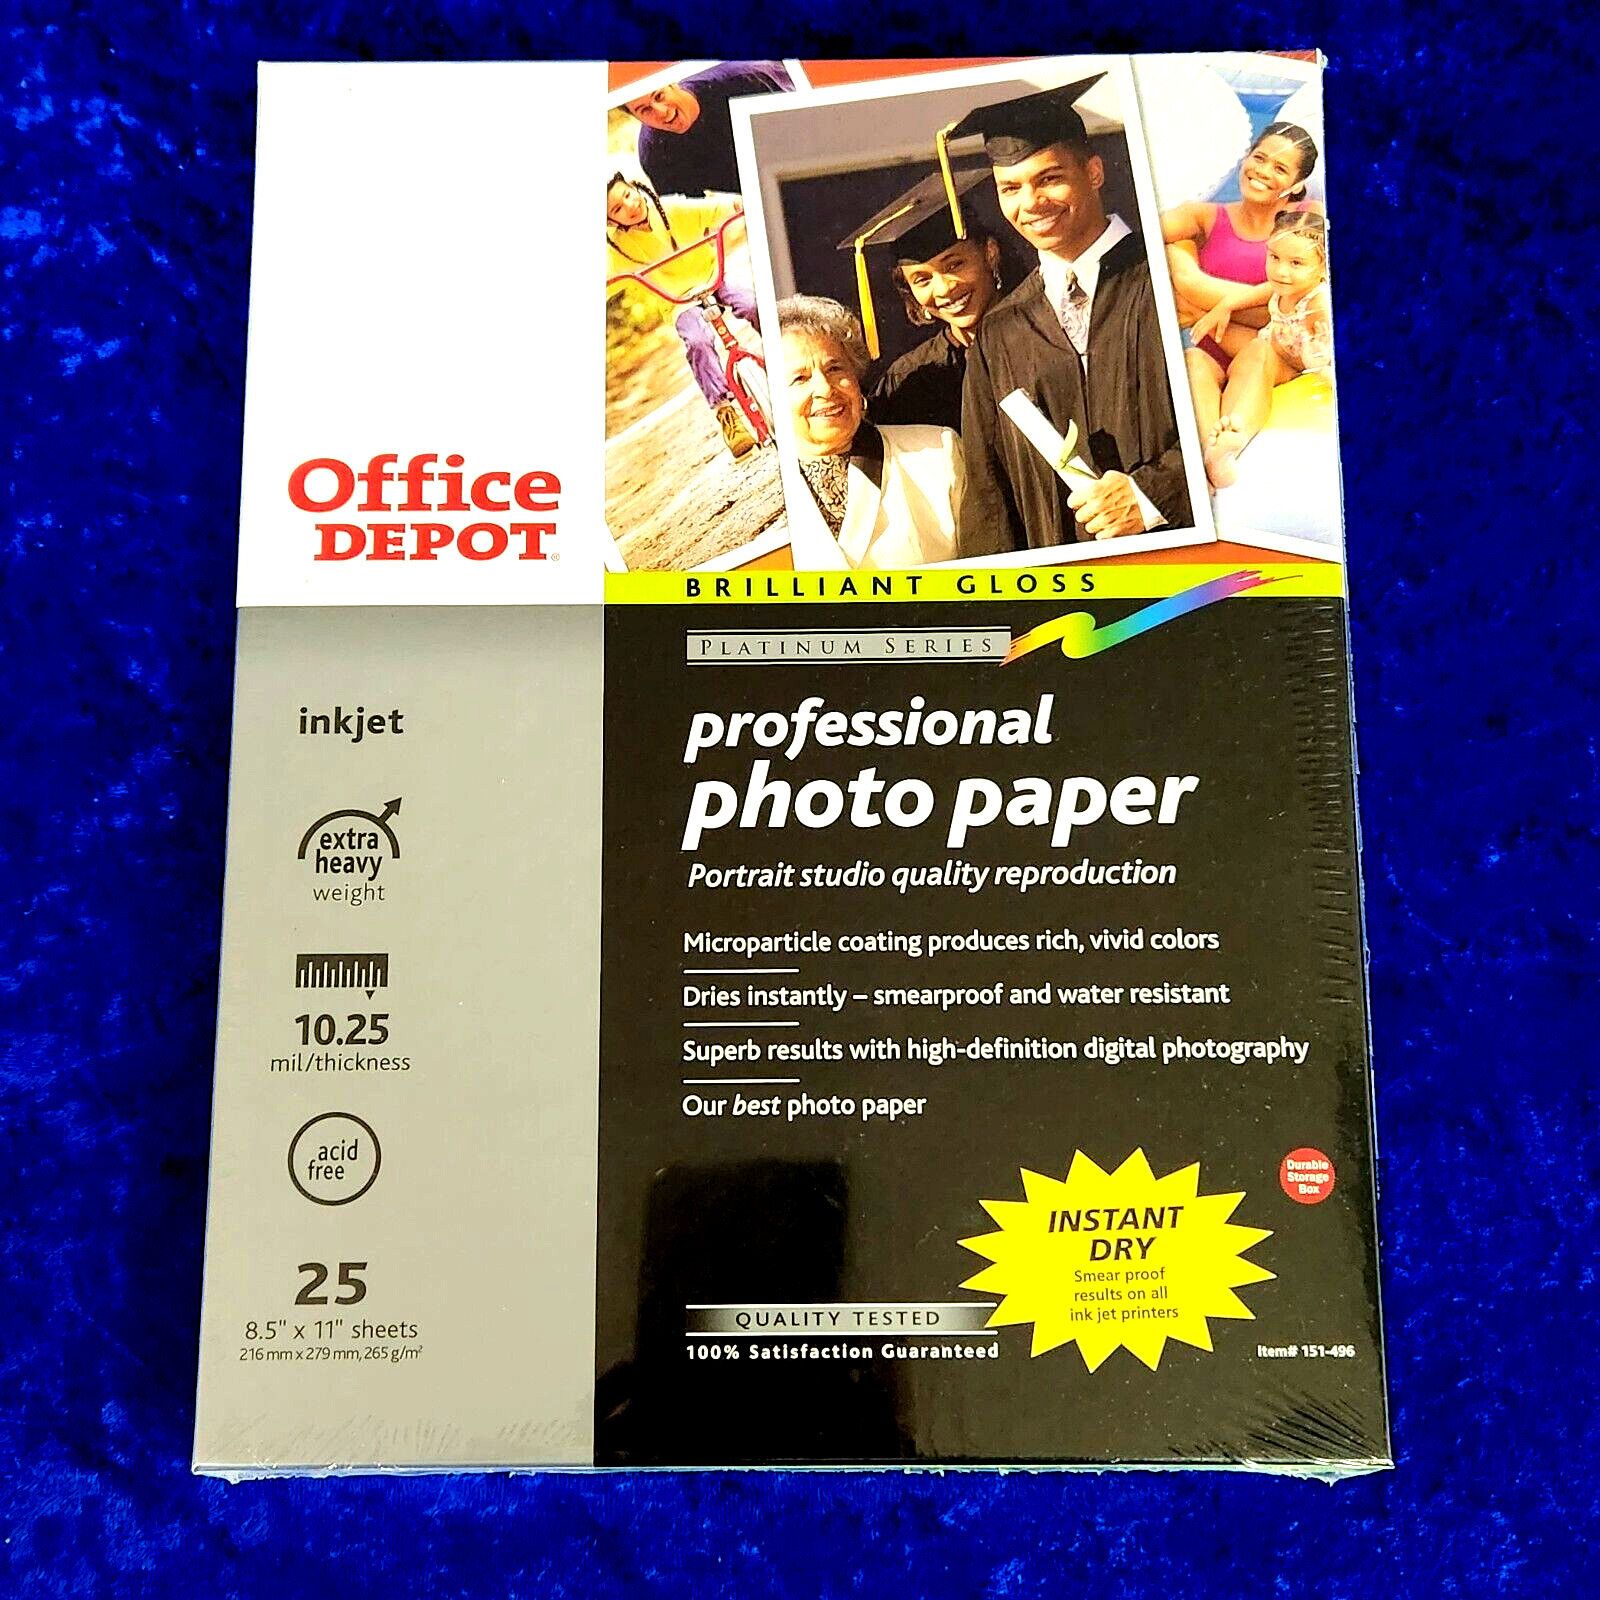 Office Depot Professional Photo Paper 151-496 Brilliant Gloss 25 Sheets 8.5 x 11